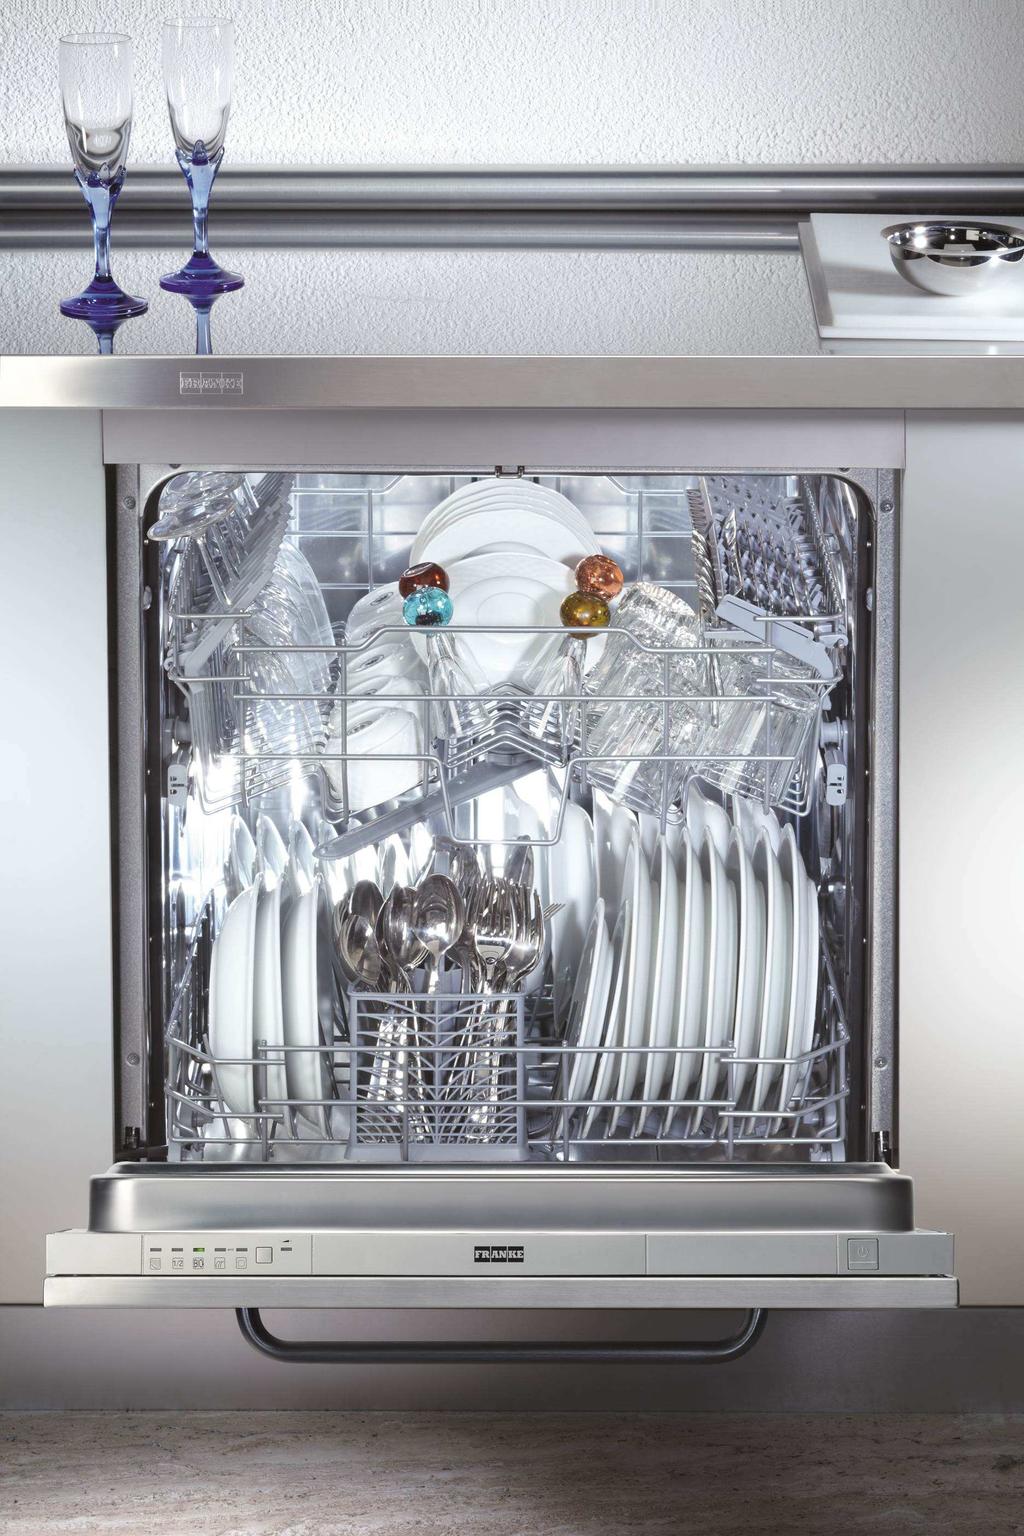 FRANKE DISHWASHER The latest generation of Franke dishwashers guarantees the very best performance: class A for low consumption, plus excellent washing and drying results in a short space of time